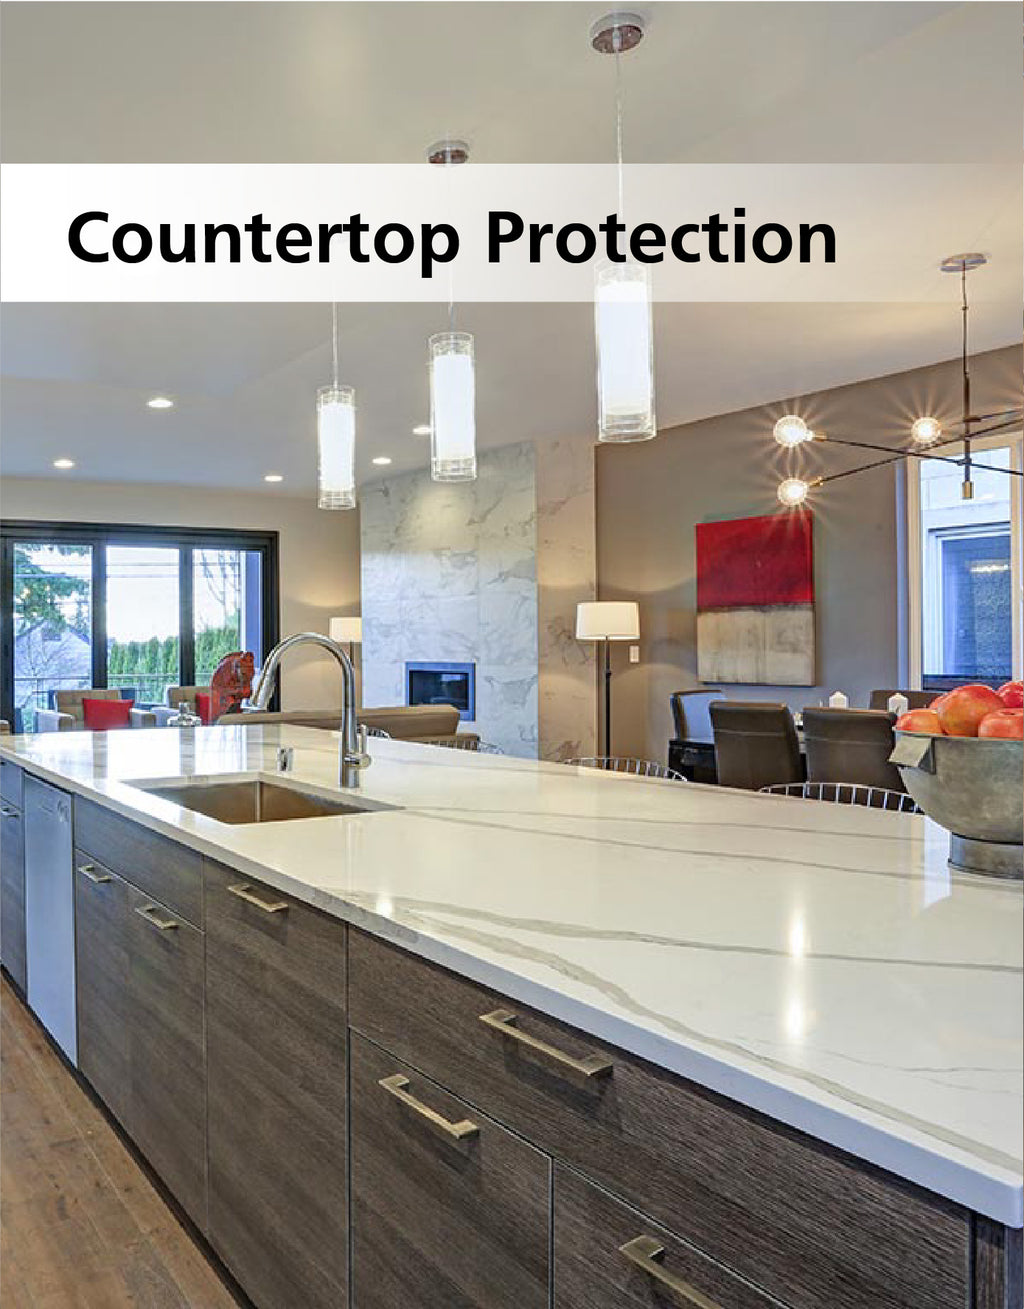 The words countertop protection with a kitchen island with white granite countertop